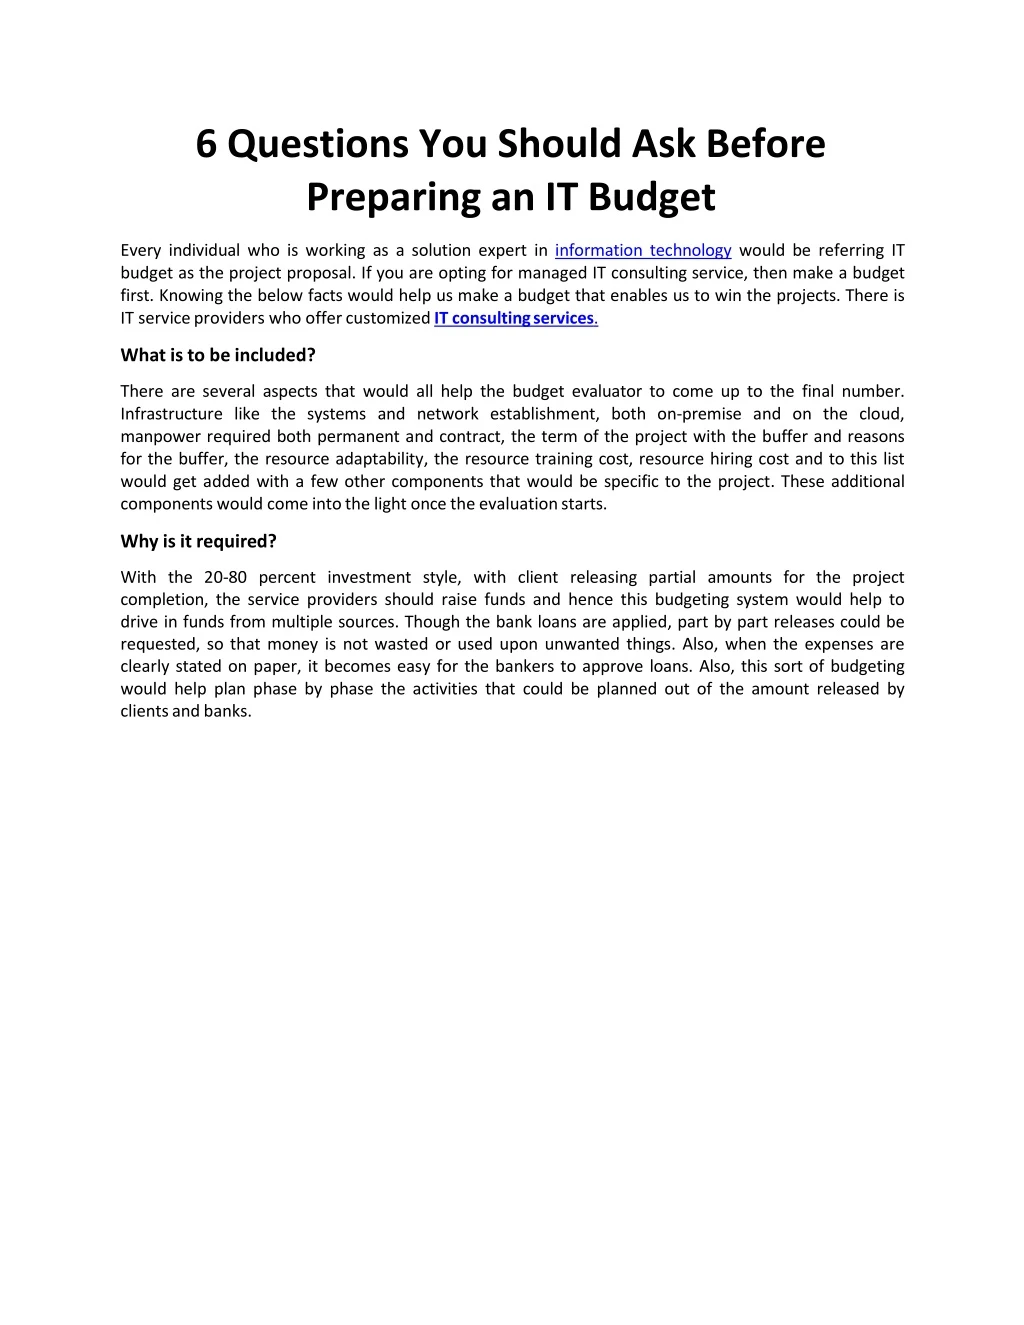 6 questions you should ask before preparing an it budget